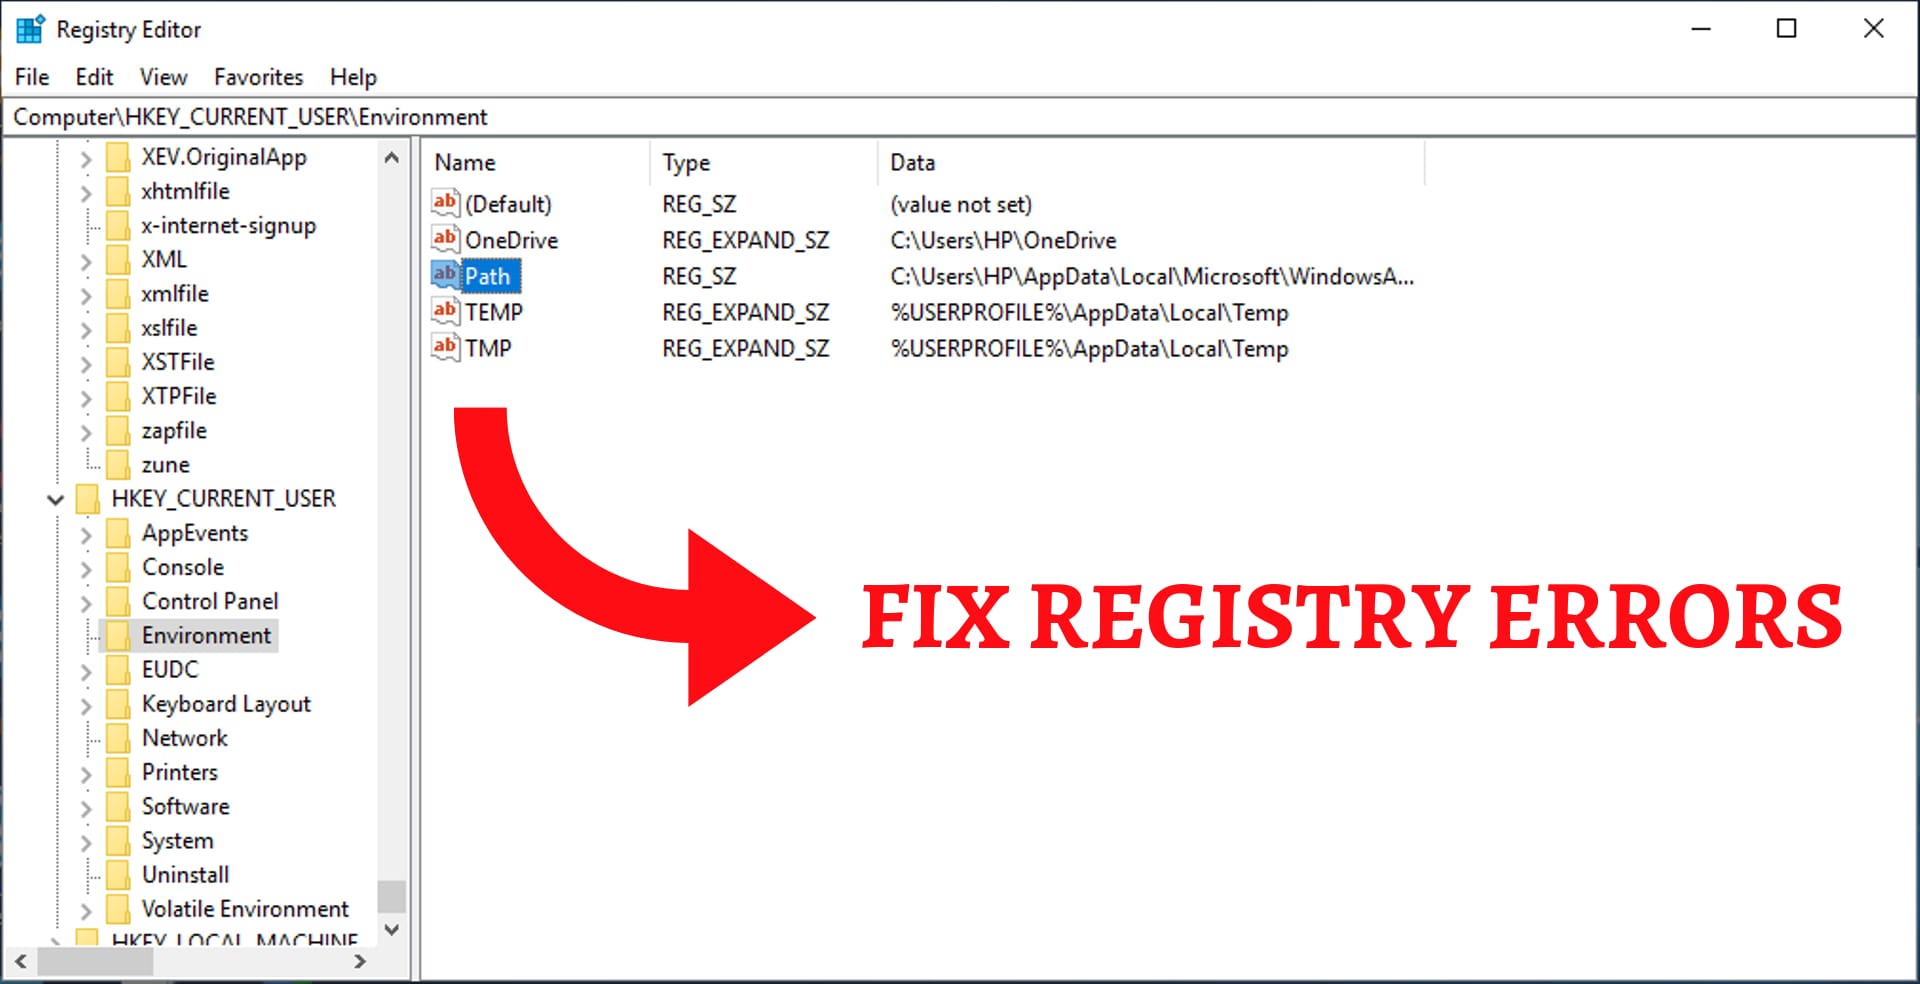 Step 5: Disable any unnecessary startup programs and services that could be causing the error.
Step 6: Use a registry cleaner tool to fix any registry errors that may be causing the error.